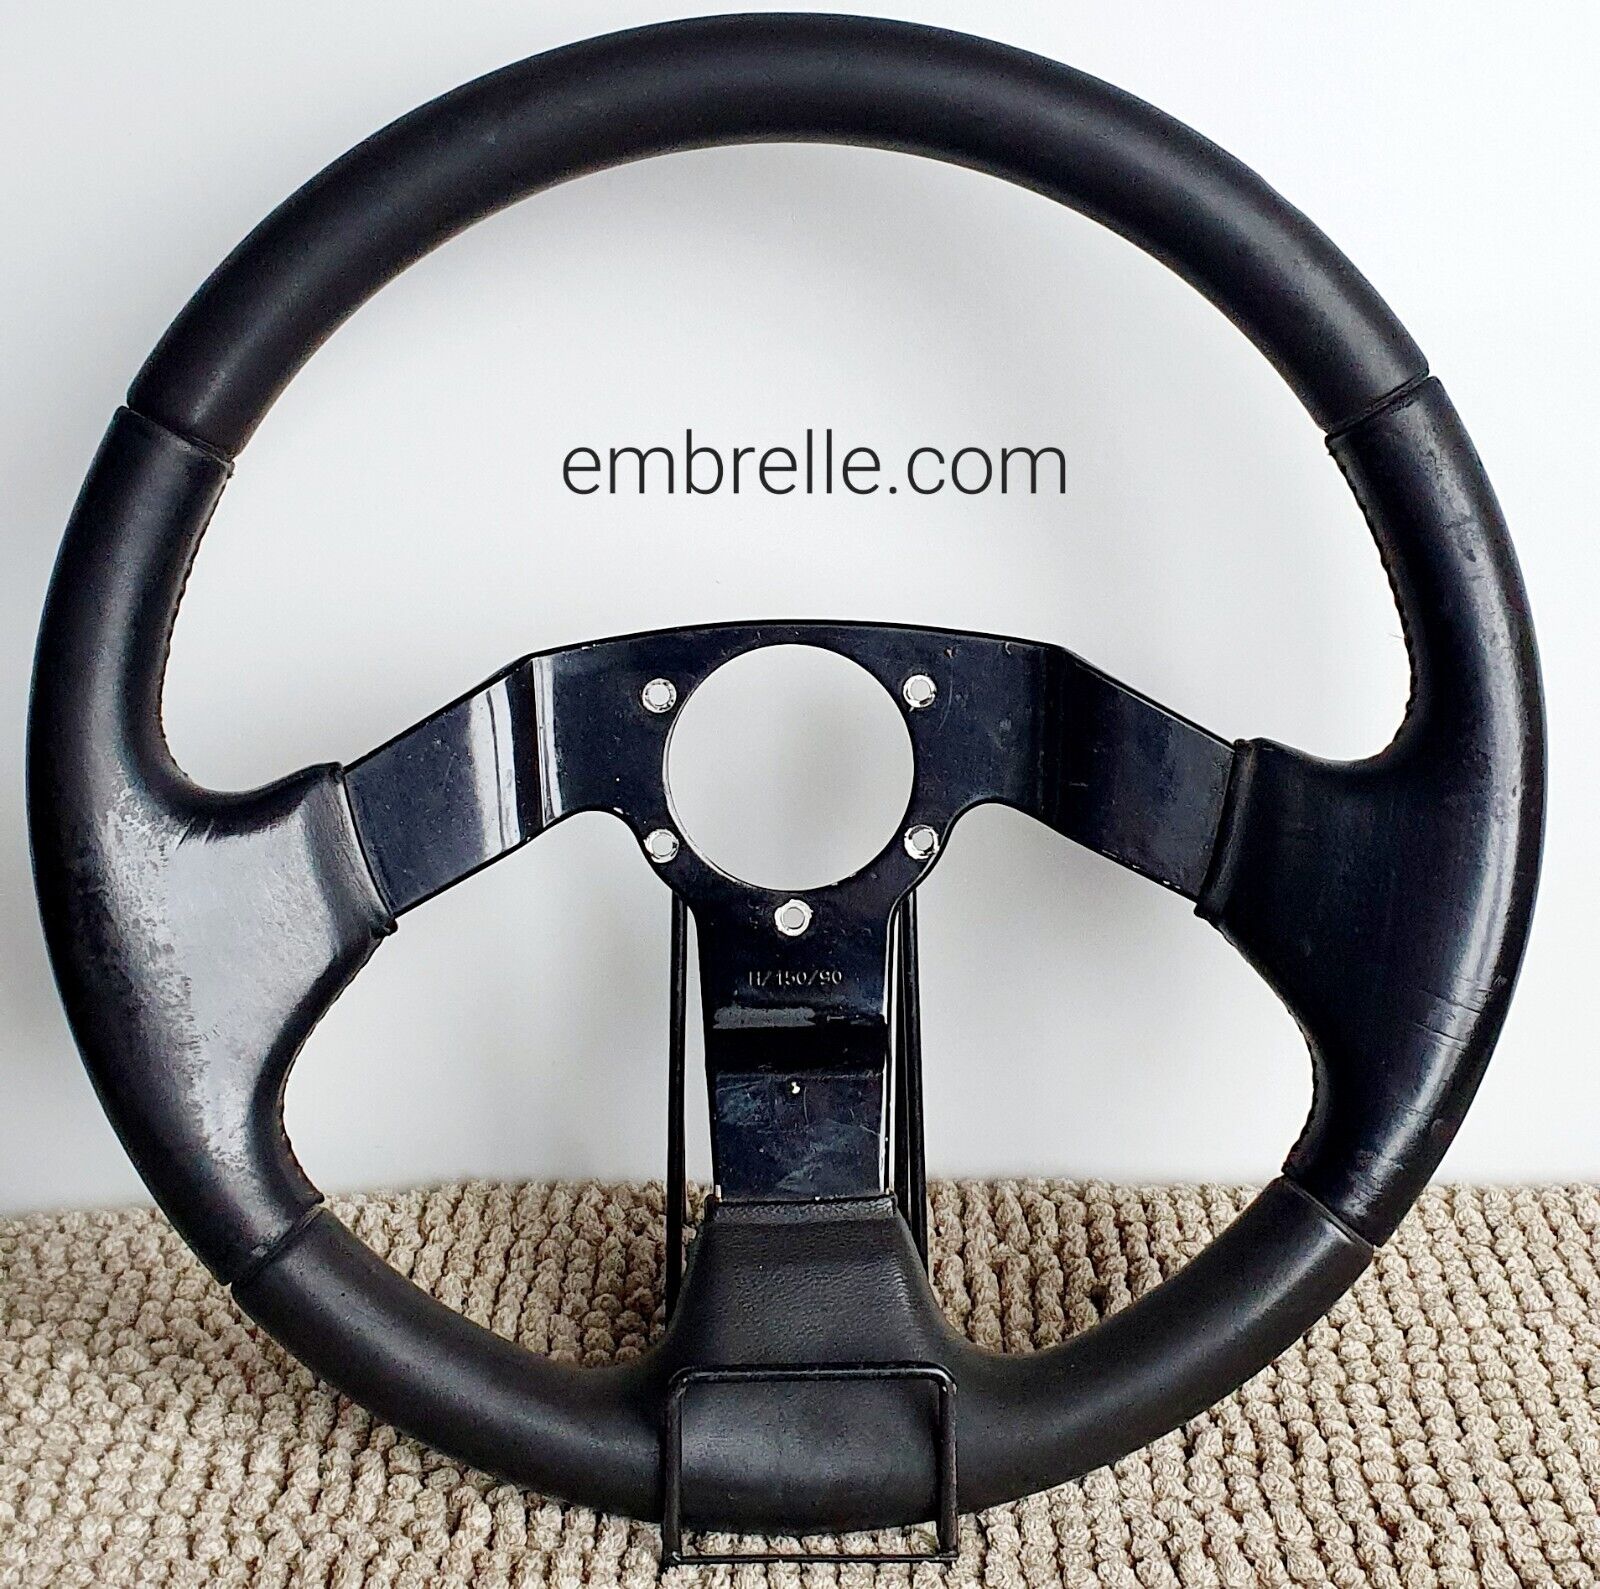 RENAULT 19 5 GT Turbo R21 Clio volant leather steering wheel 365mm VERY RARE OEM